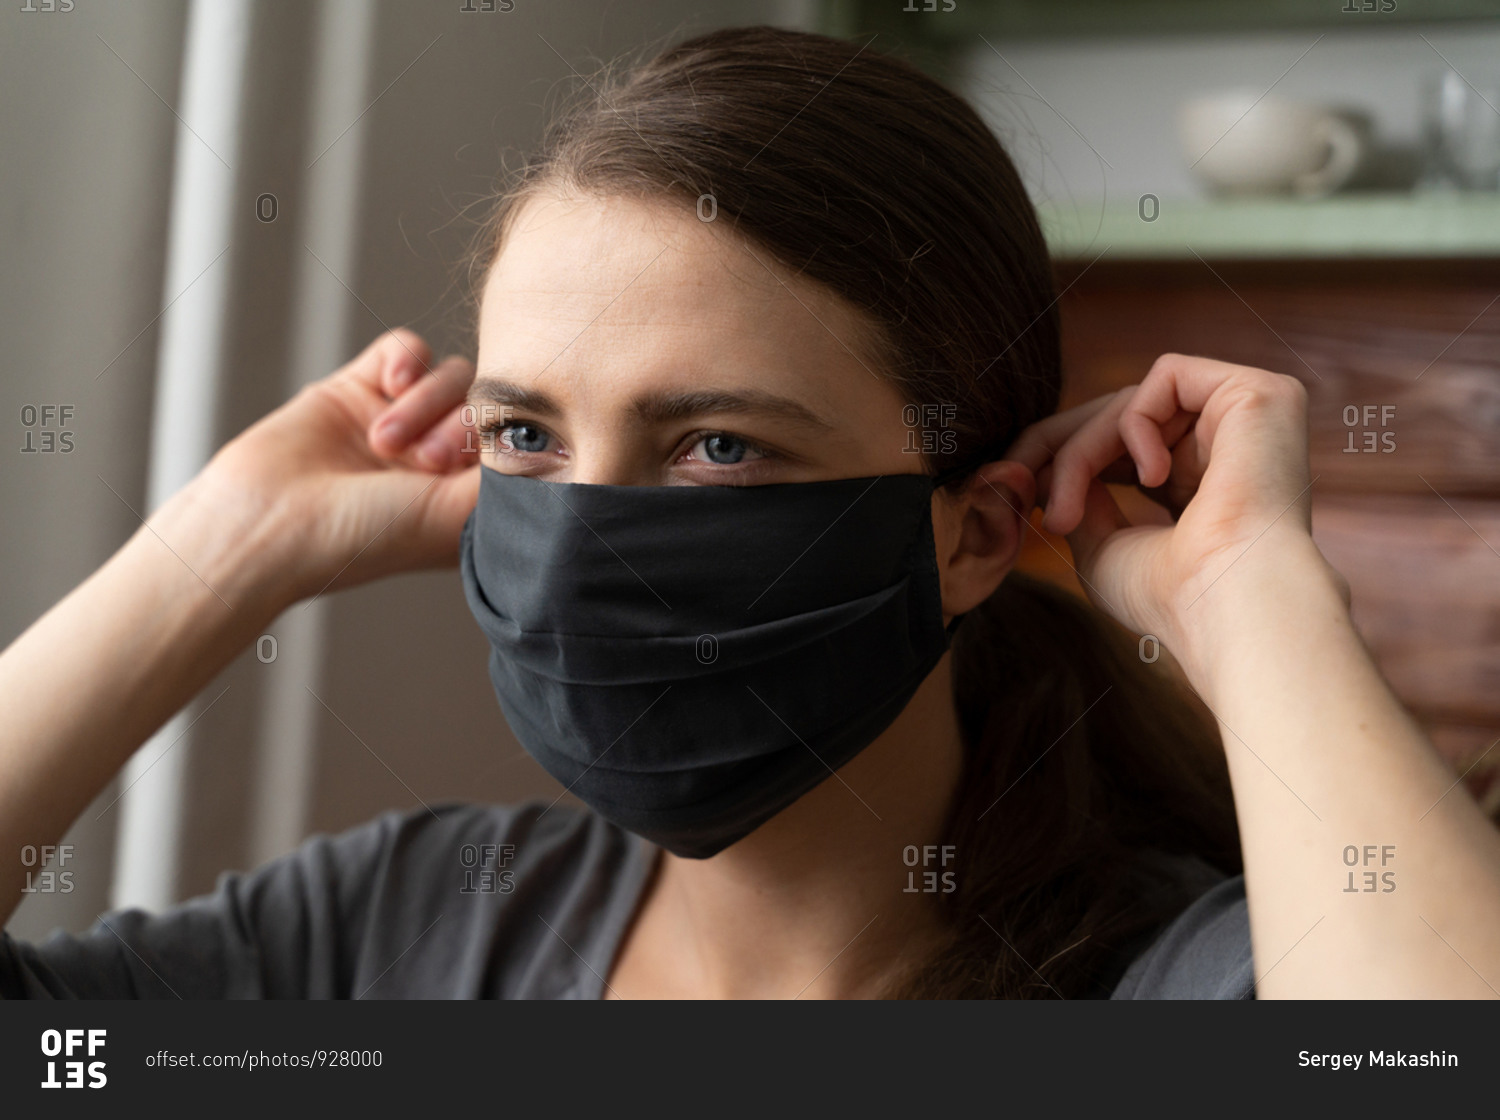 A woman holds a protective silk mask on her face to protect herself from the covid-19 virus